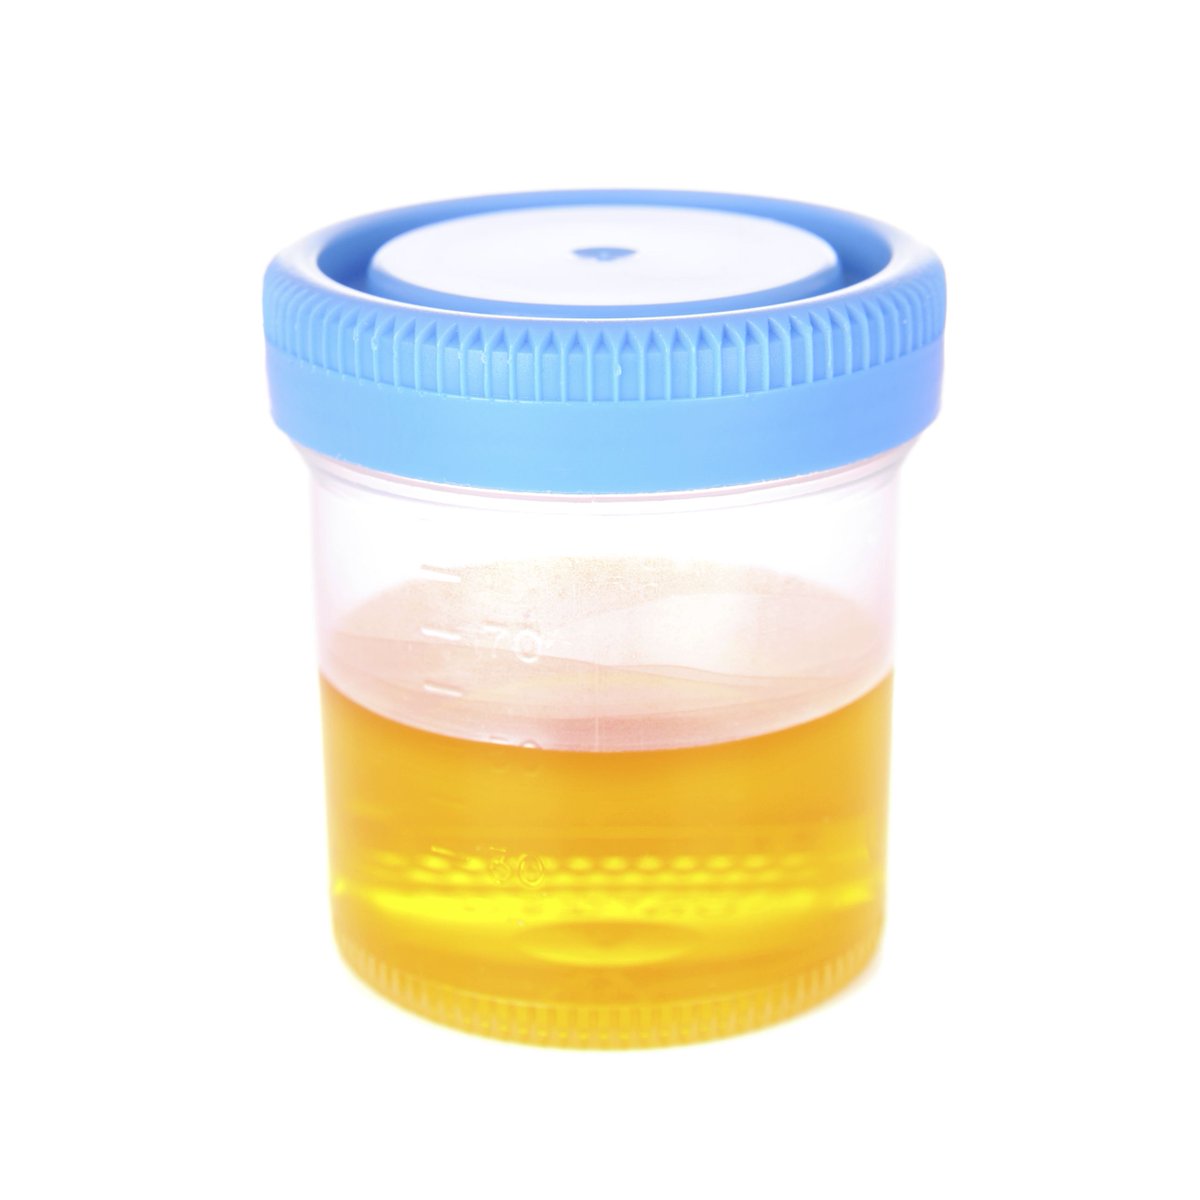 One footnote: a related misconception is that urine is yellow because of bilirubin. I think this idea arises because people with bile duct obstruction become jaundiced and yellow & urine does change color in hyperbilirubinemia. Bilirubin is excreted as bile... /21